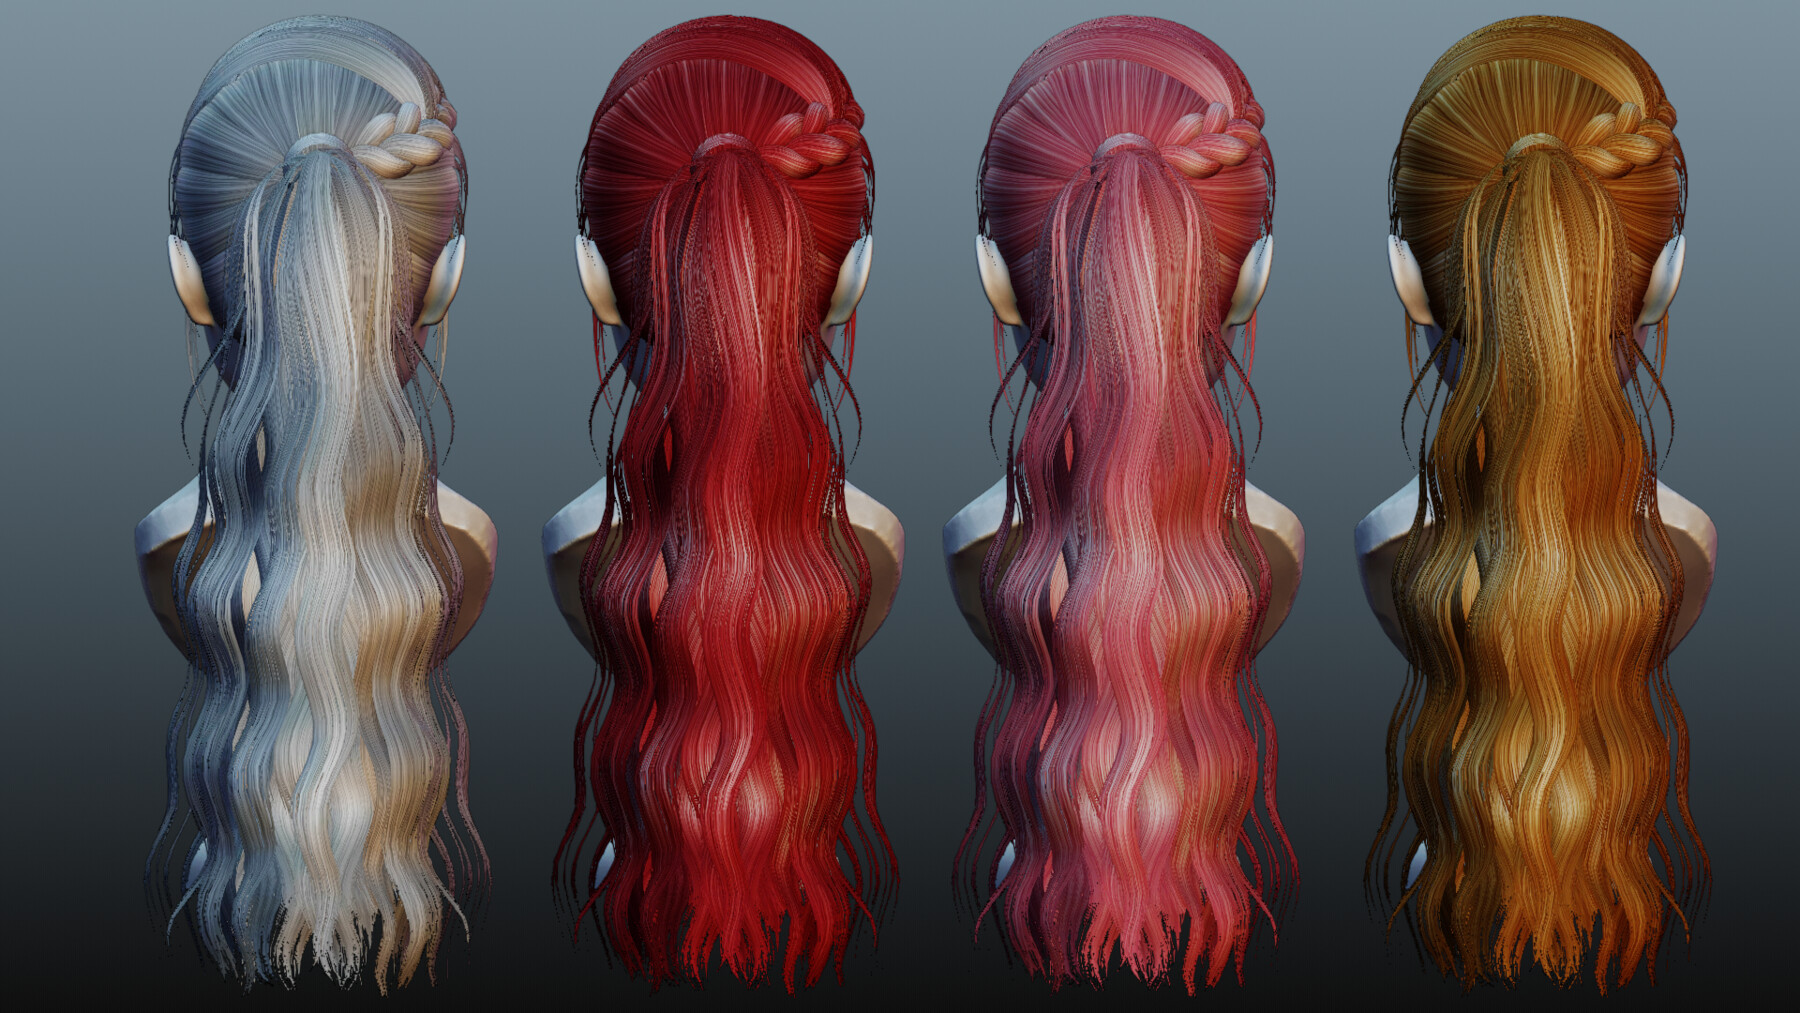 ArtStation - Female hair 4 color low poly